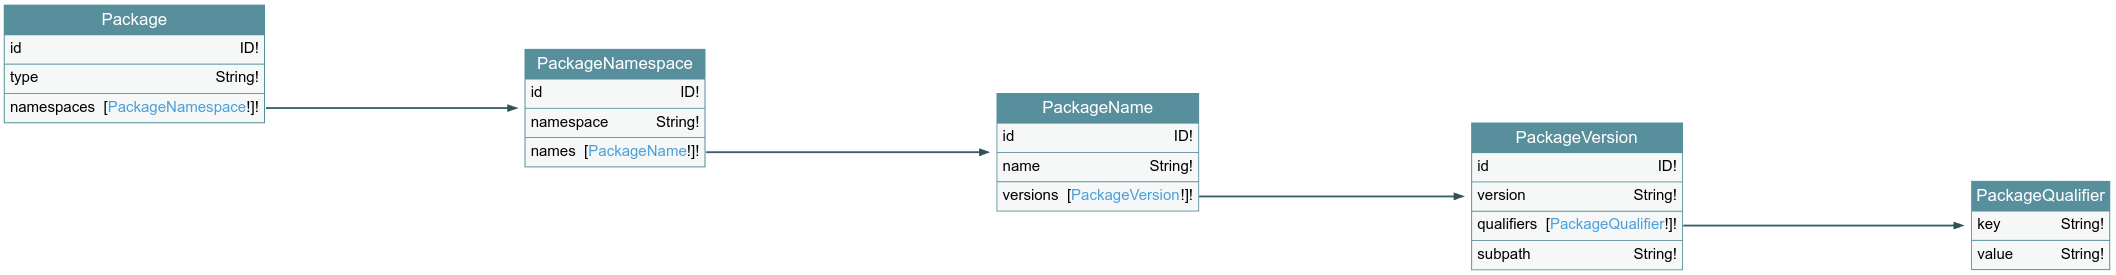 graphical representation of the package trie